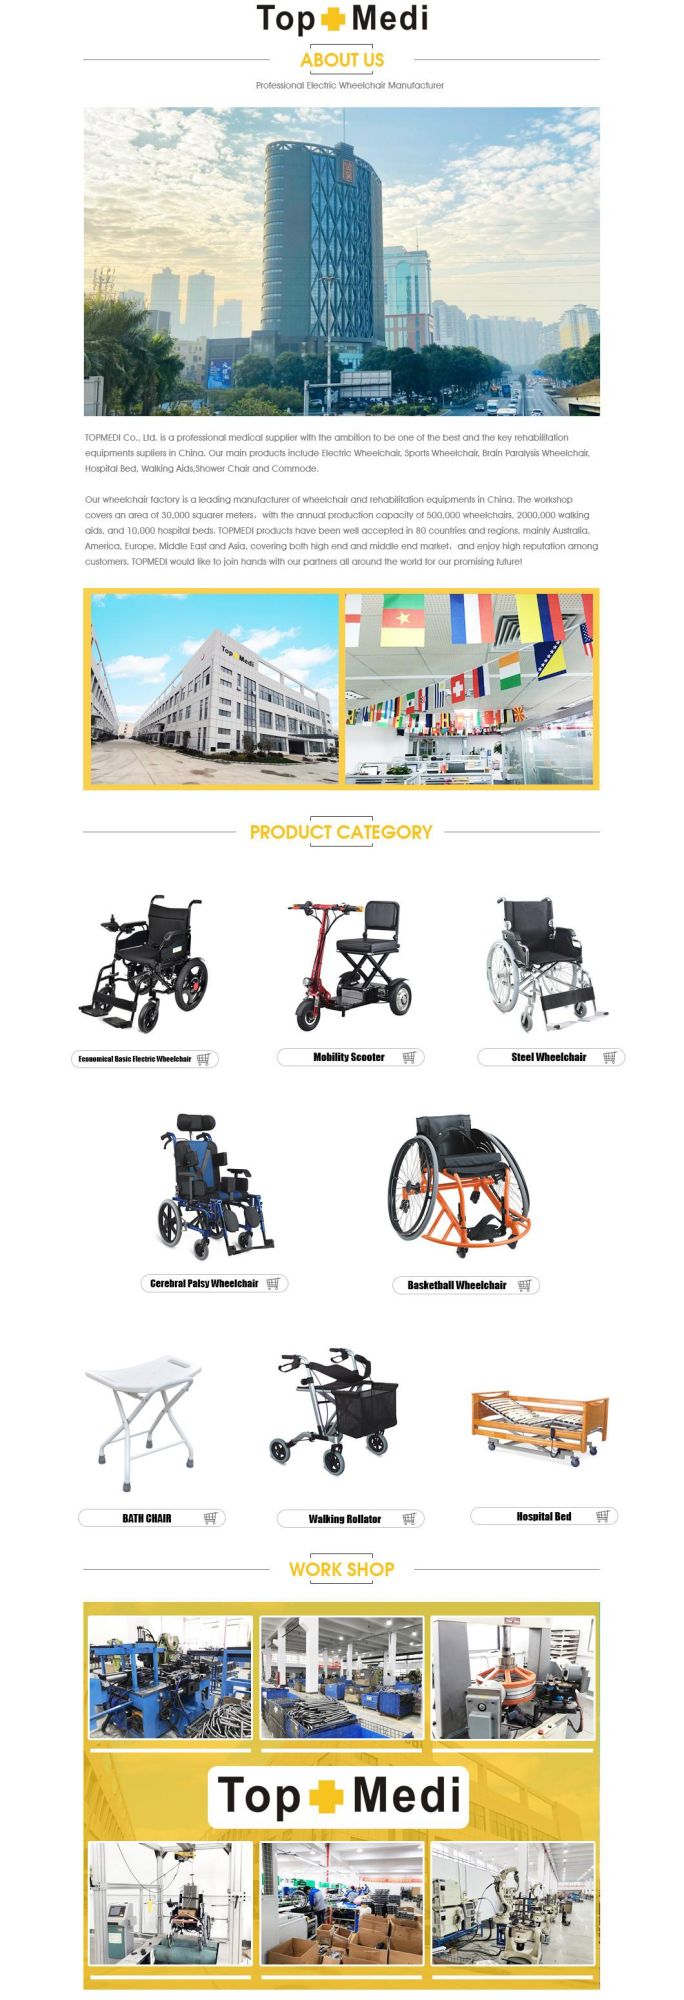 ISO Approved Transfer Wheelchairs Transferring Patient to Wheelchair with Seat Commode Chair